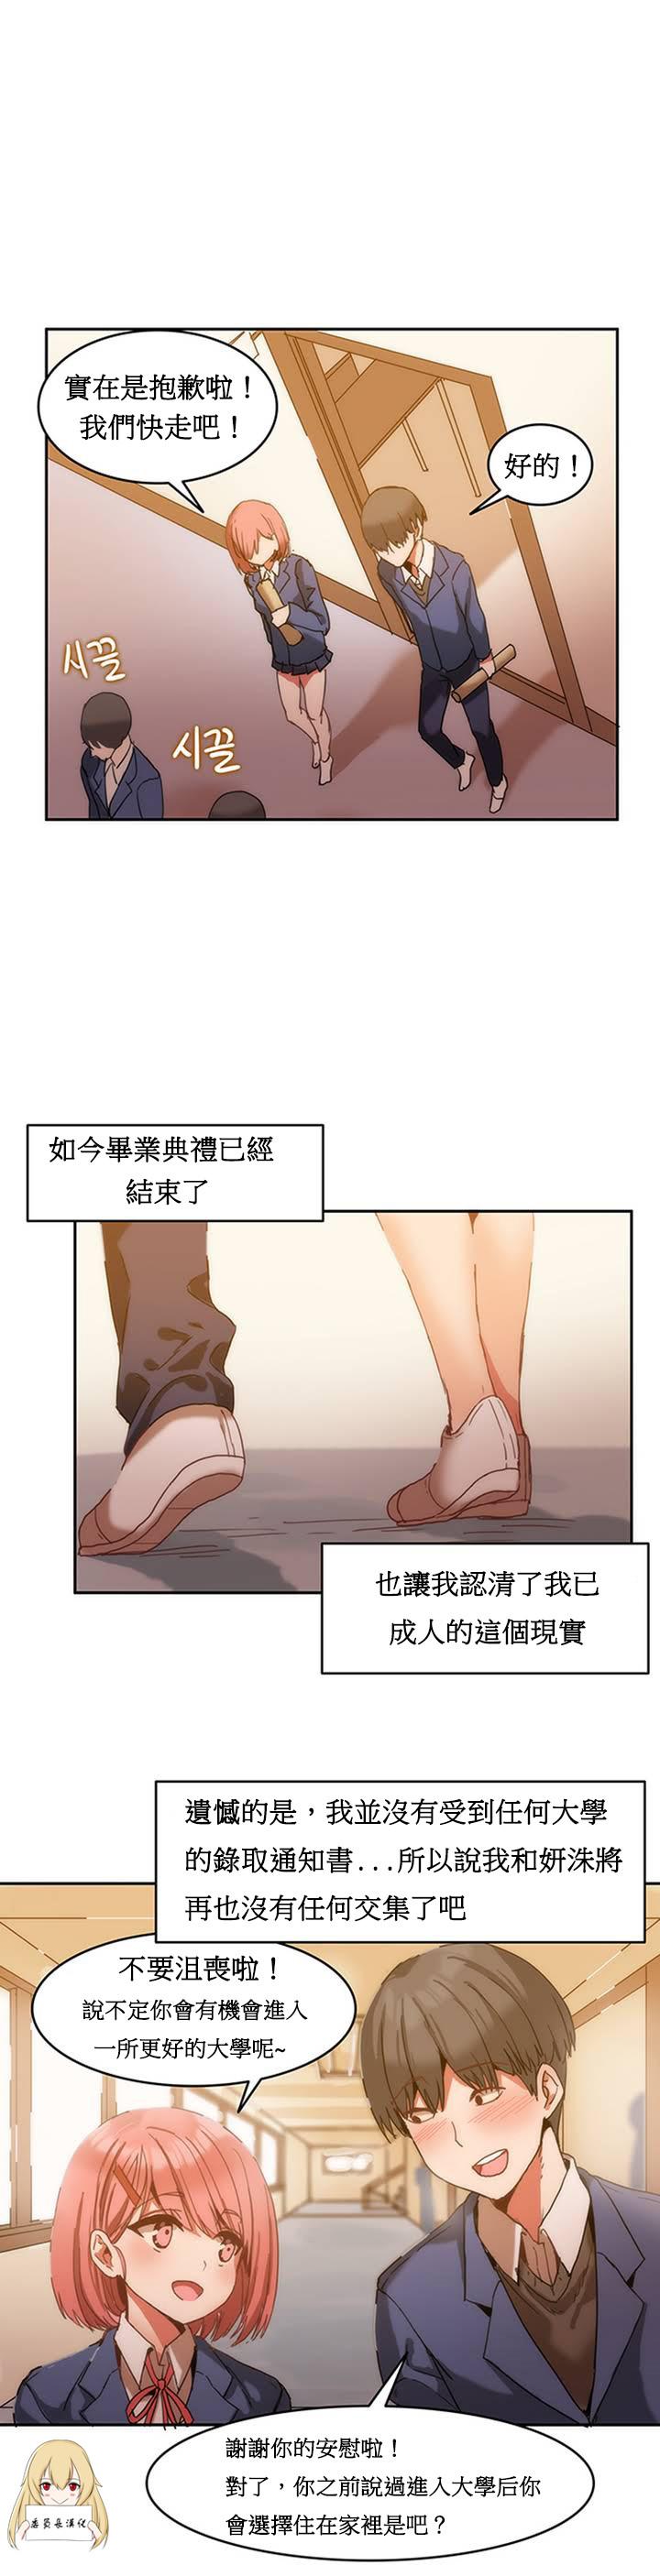 Ladyboy Hahri's Lumpy Boardhouse Ch. 1~12【委員長個人漢化】（持續更新） Humiliation - Page 6